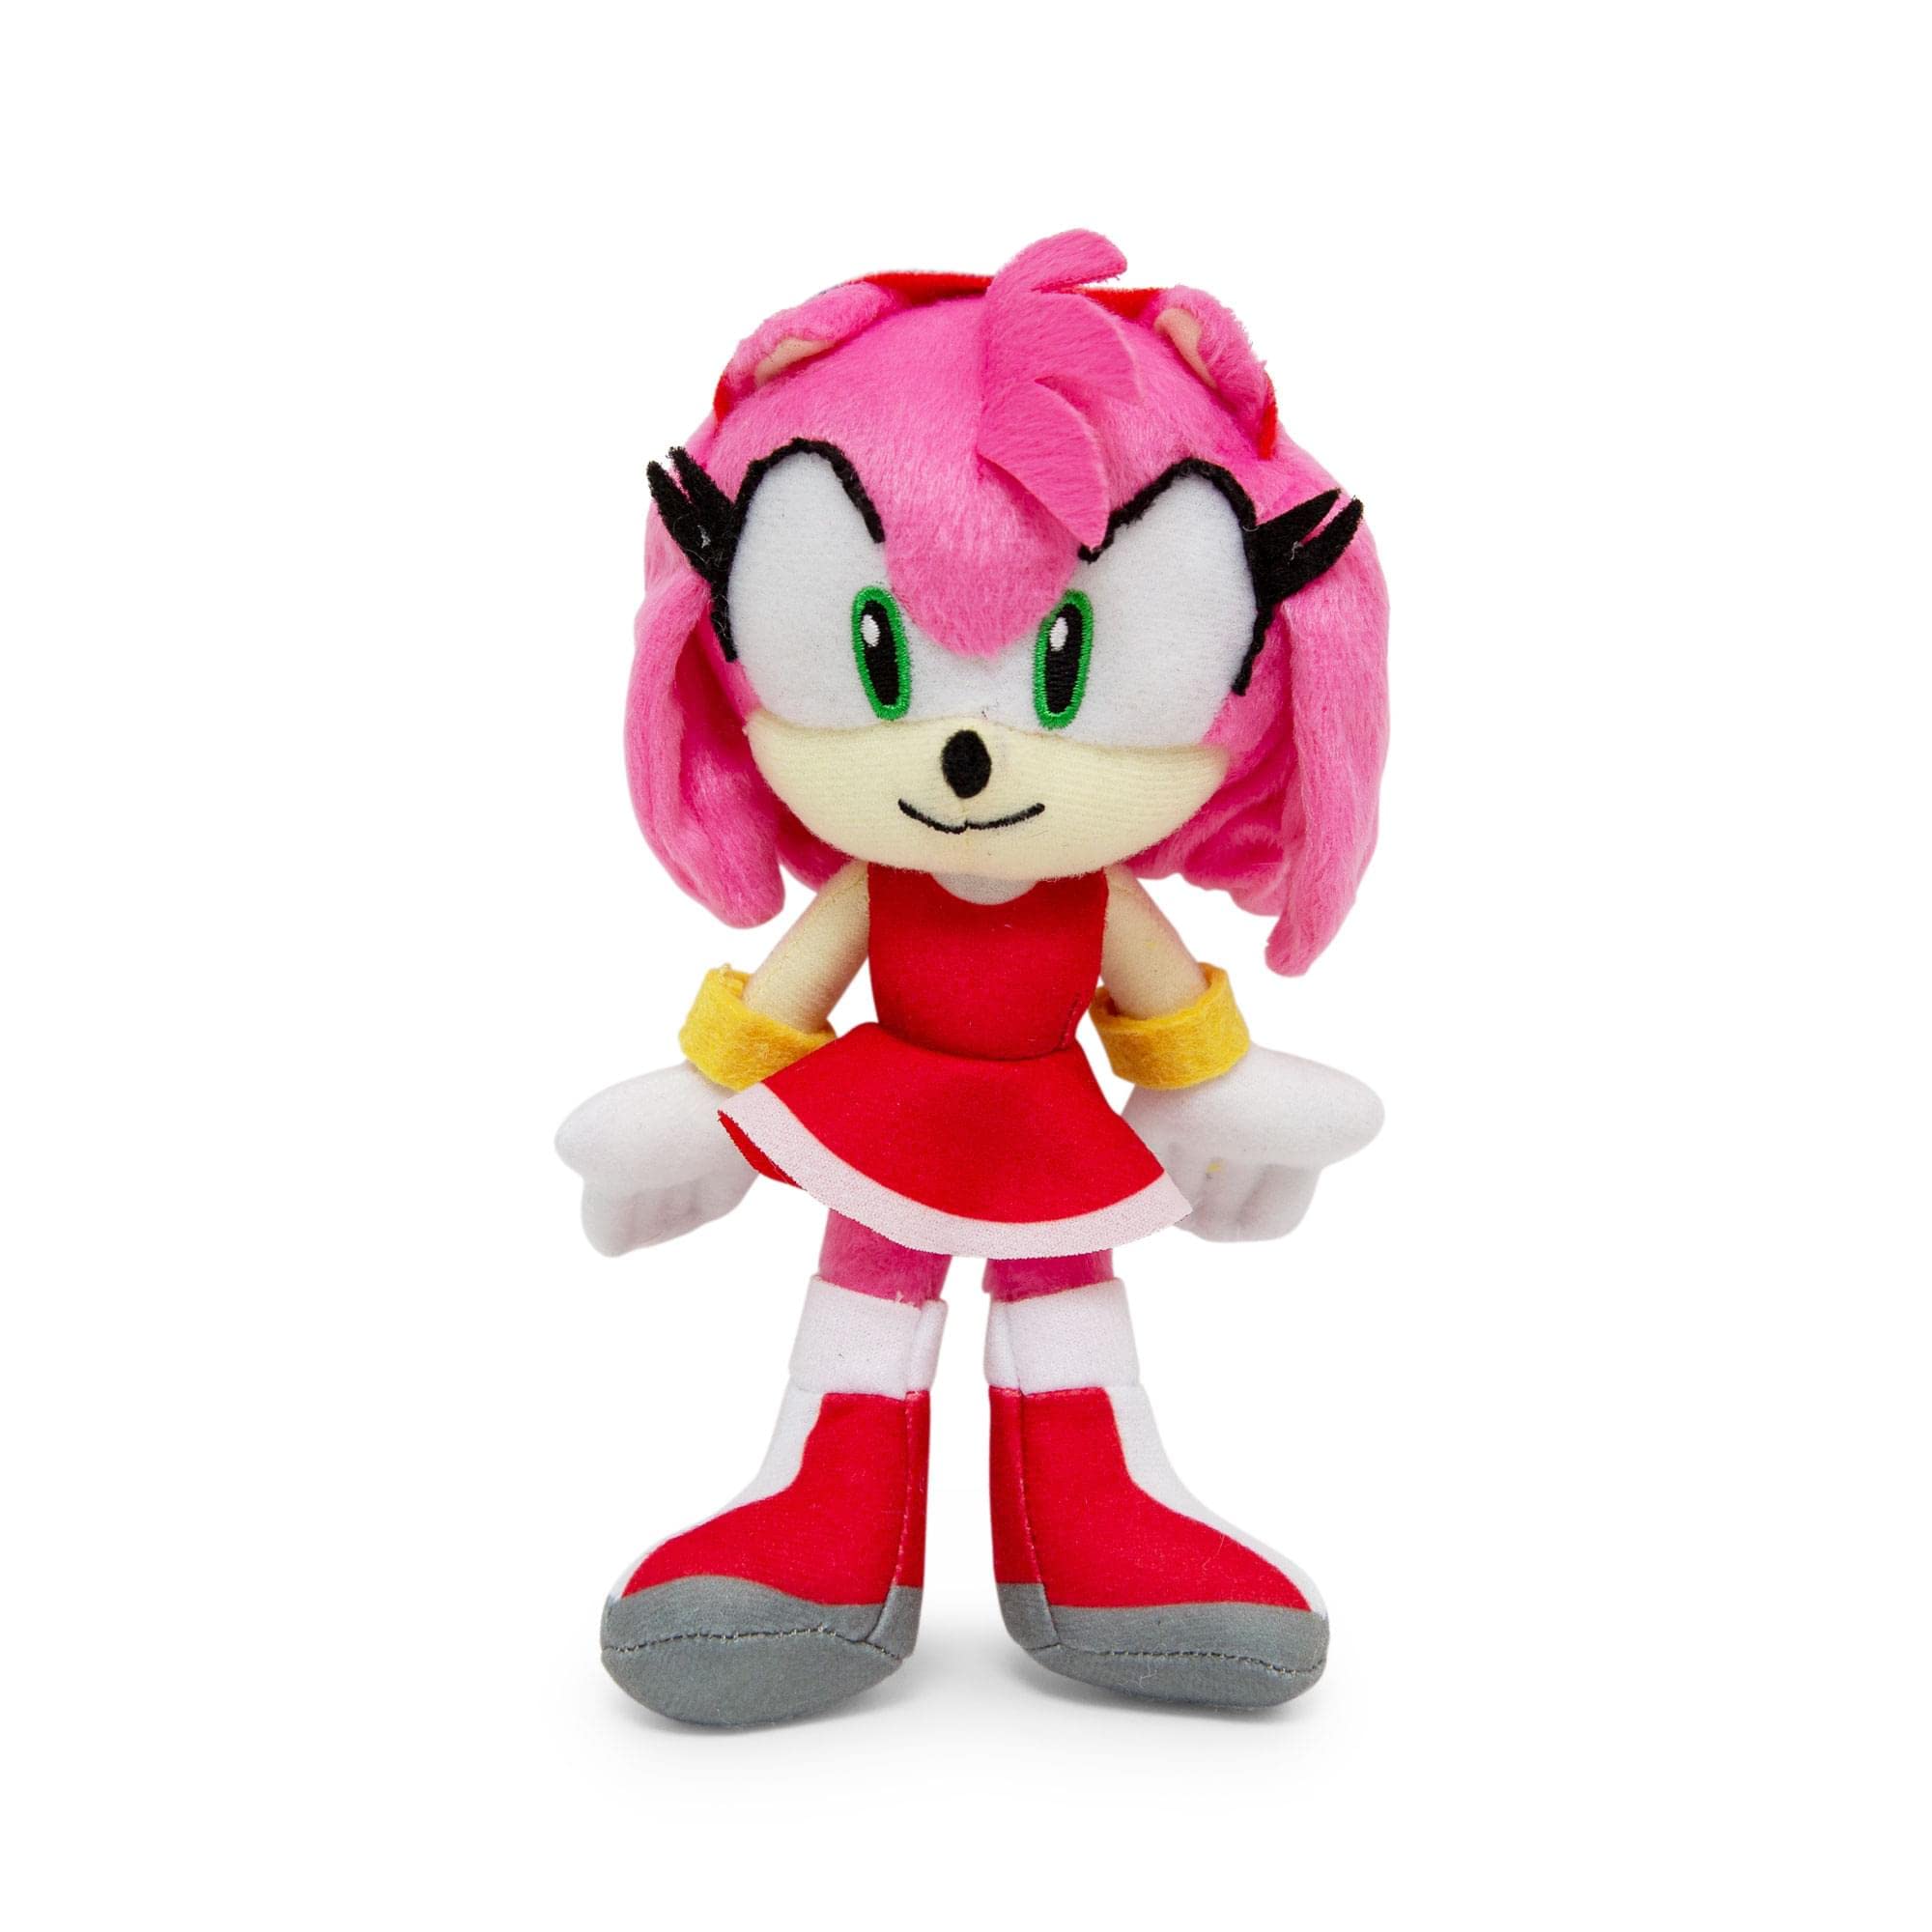 Accessory Innovations Sonic The Hedgehog 8-Inch Amy Rose Character Plush TOY | Kawaii Cute Soft Stuf